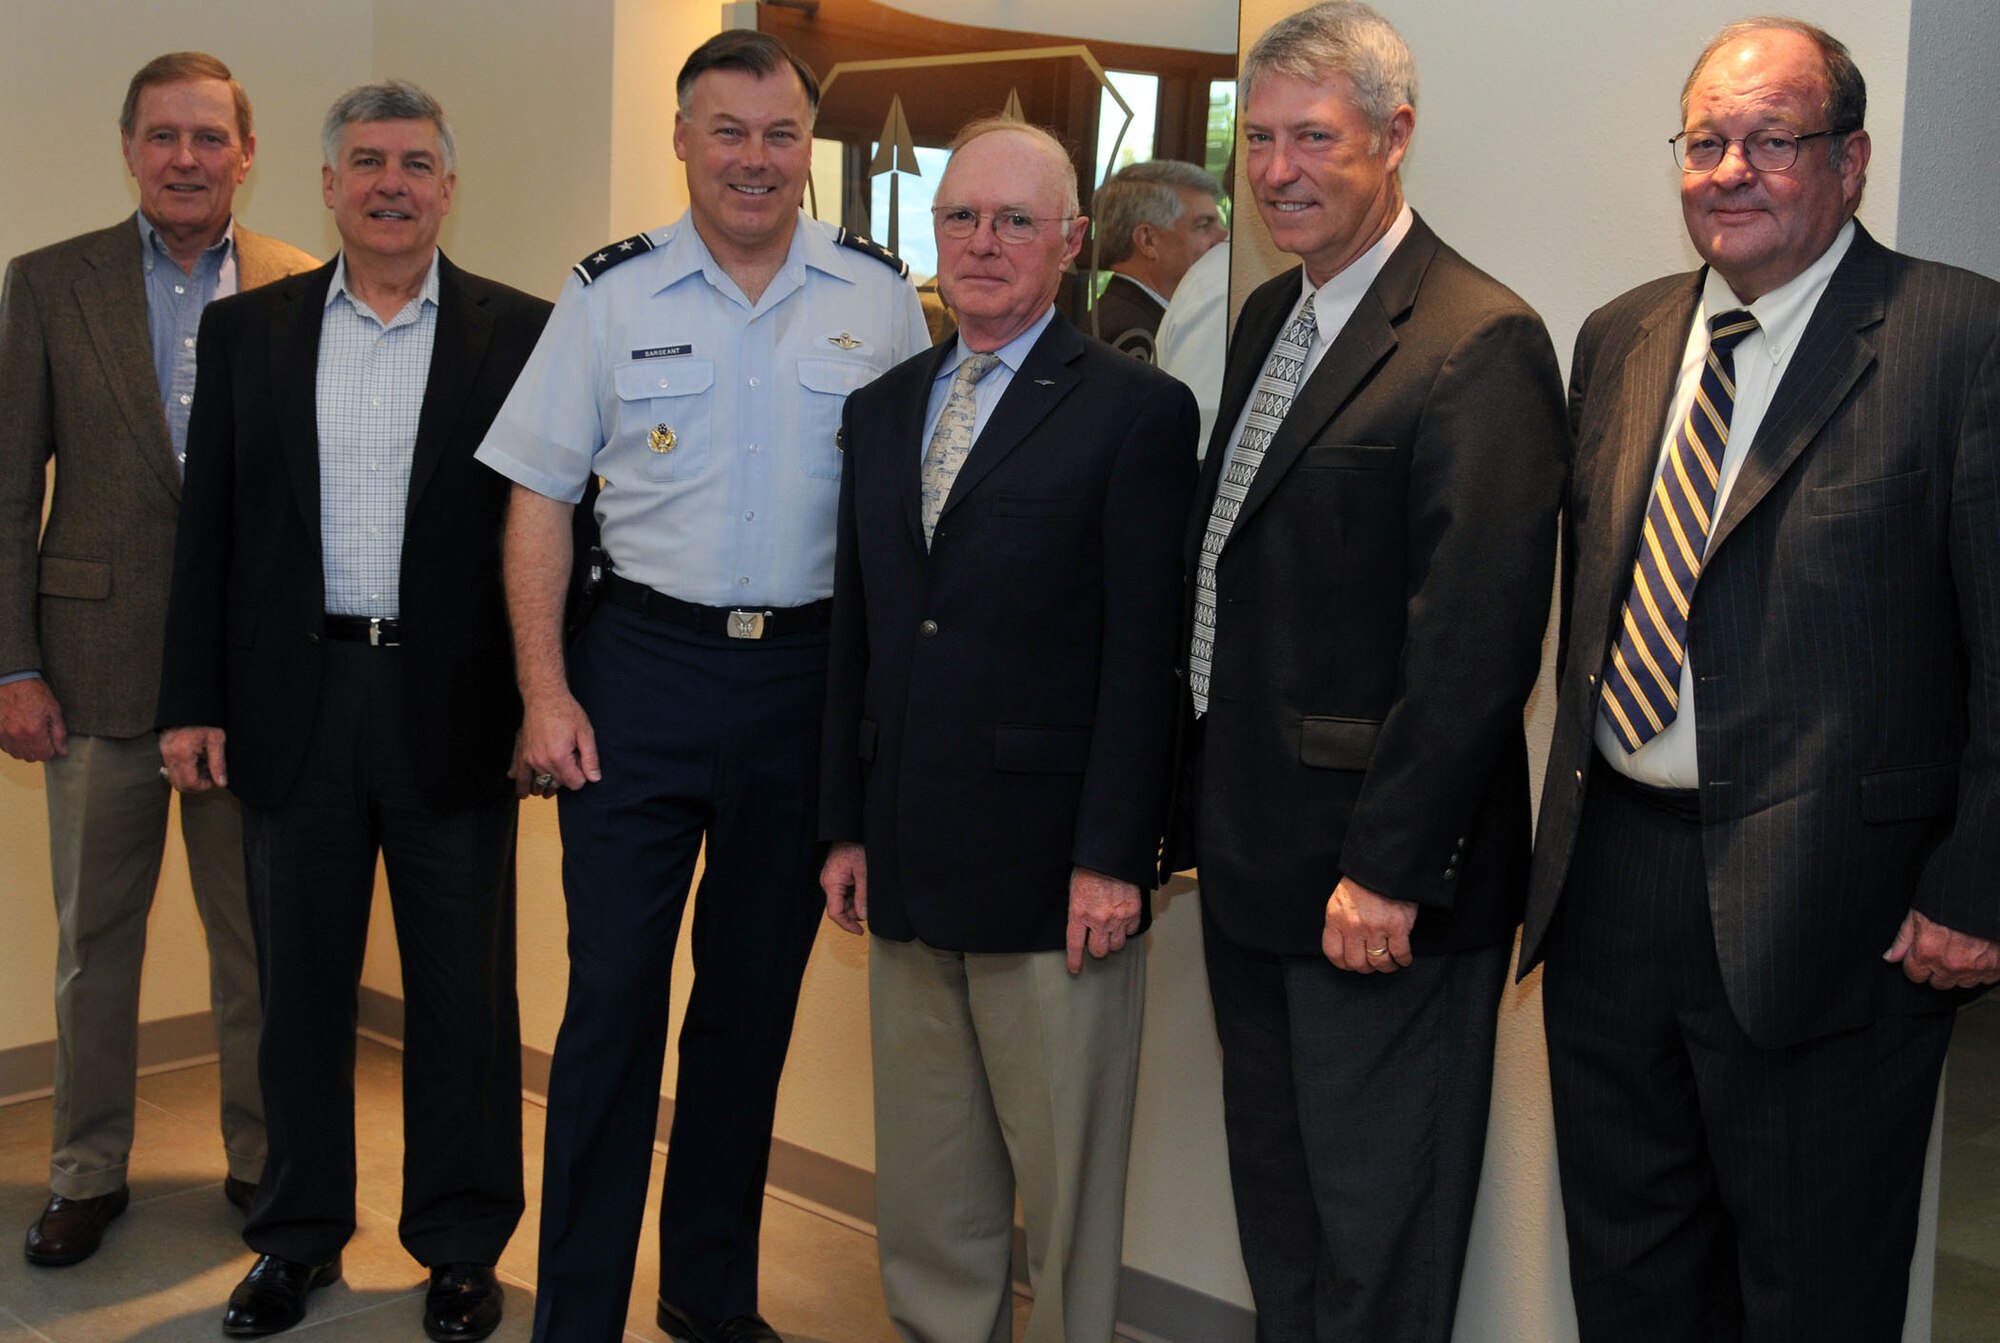 The Air Force Operational Test and Evaluation Center hosted four former AFOTEC commanders May 17-18 at AFOTEC’s headquarters at Kirtland Air Force Base, N.M. From left to right: retired Maj. Gen. Michael Hall (1985-1987); retired Maj. Gen. Felix Dupré (2003-2005) ; Maj. Gen. Stephen T. Sargeant, AFOTEC commander; retired Maj. Gen. George Harrison (1993-1997); retired Maj. Gen. Ken Peck (2000-2003); and Dave Hamilton, AFOTEC Executive Director. (Photo by George Diamond).